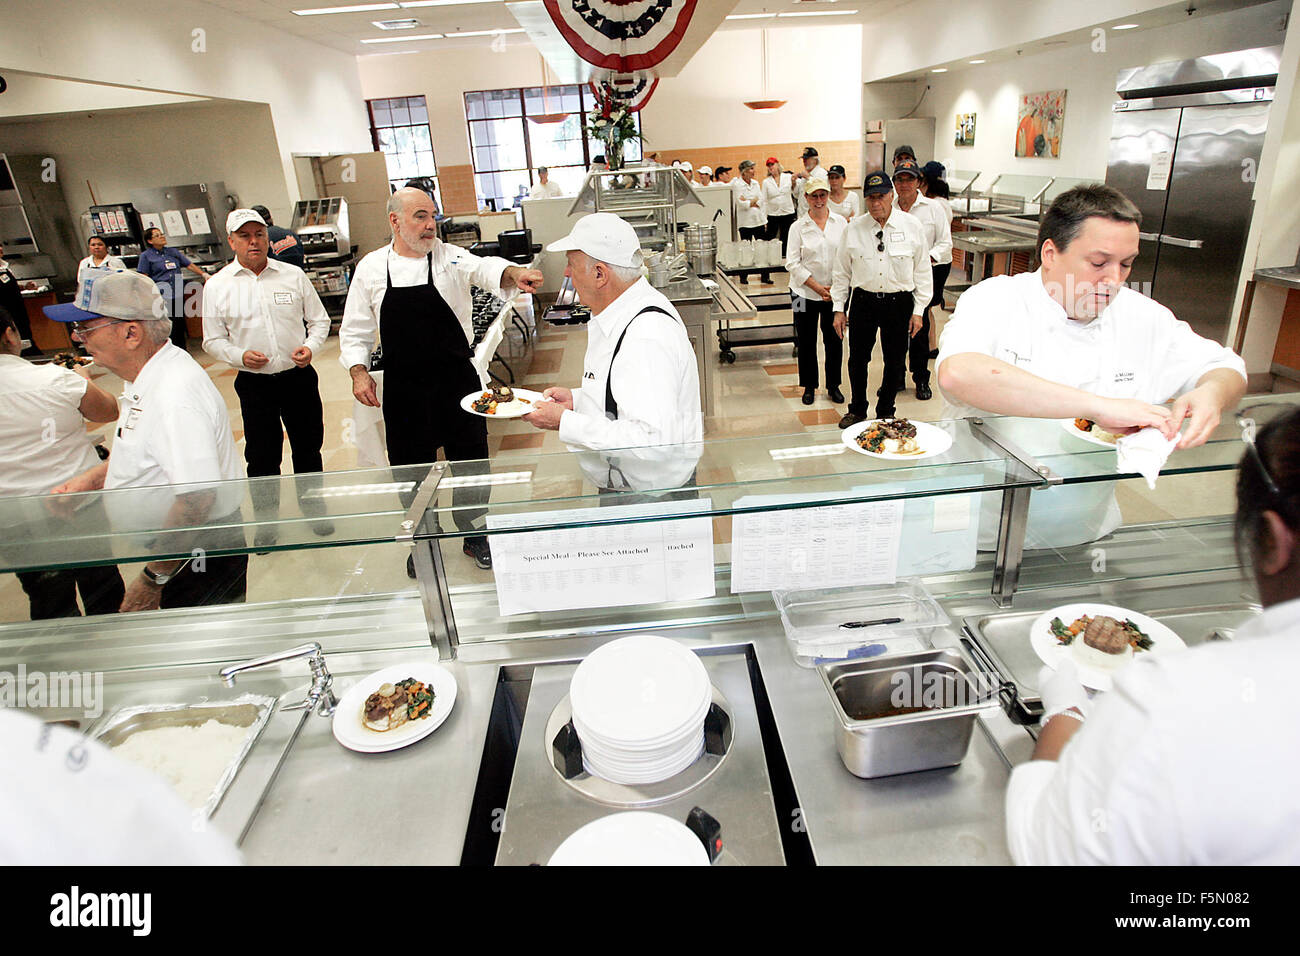 https://c8.alamy.com/comp/F5N082/yountville-ca-usa-4th-nov-2015-chef-kevin-miller-right-of-the-vintage-F5N082.jpg